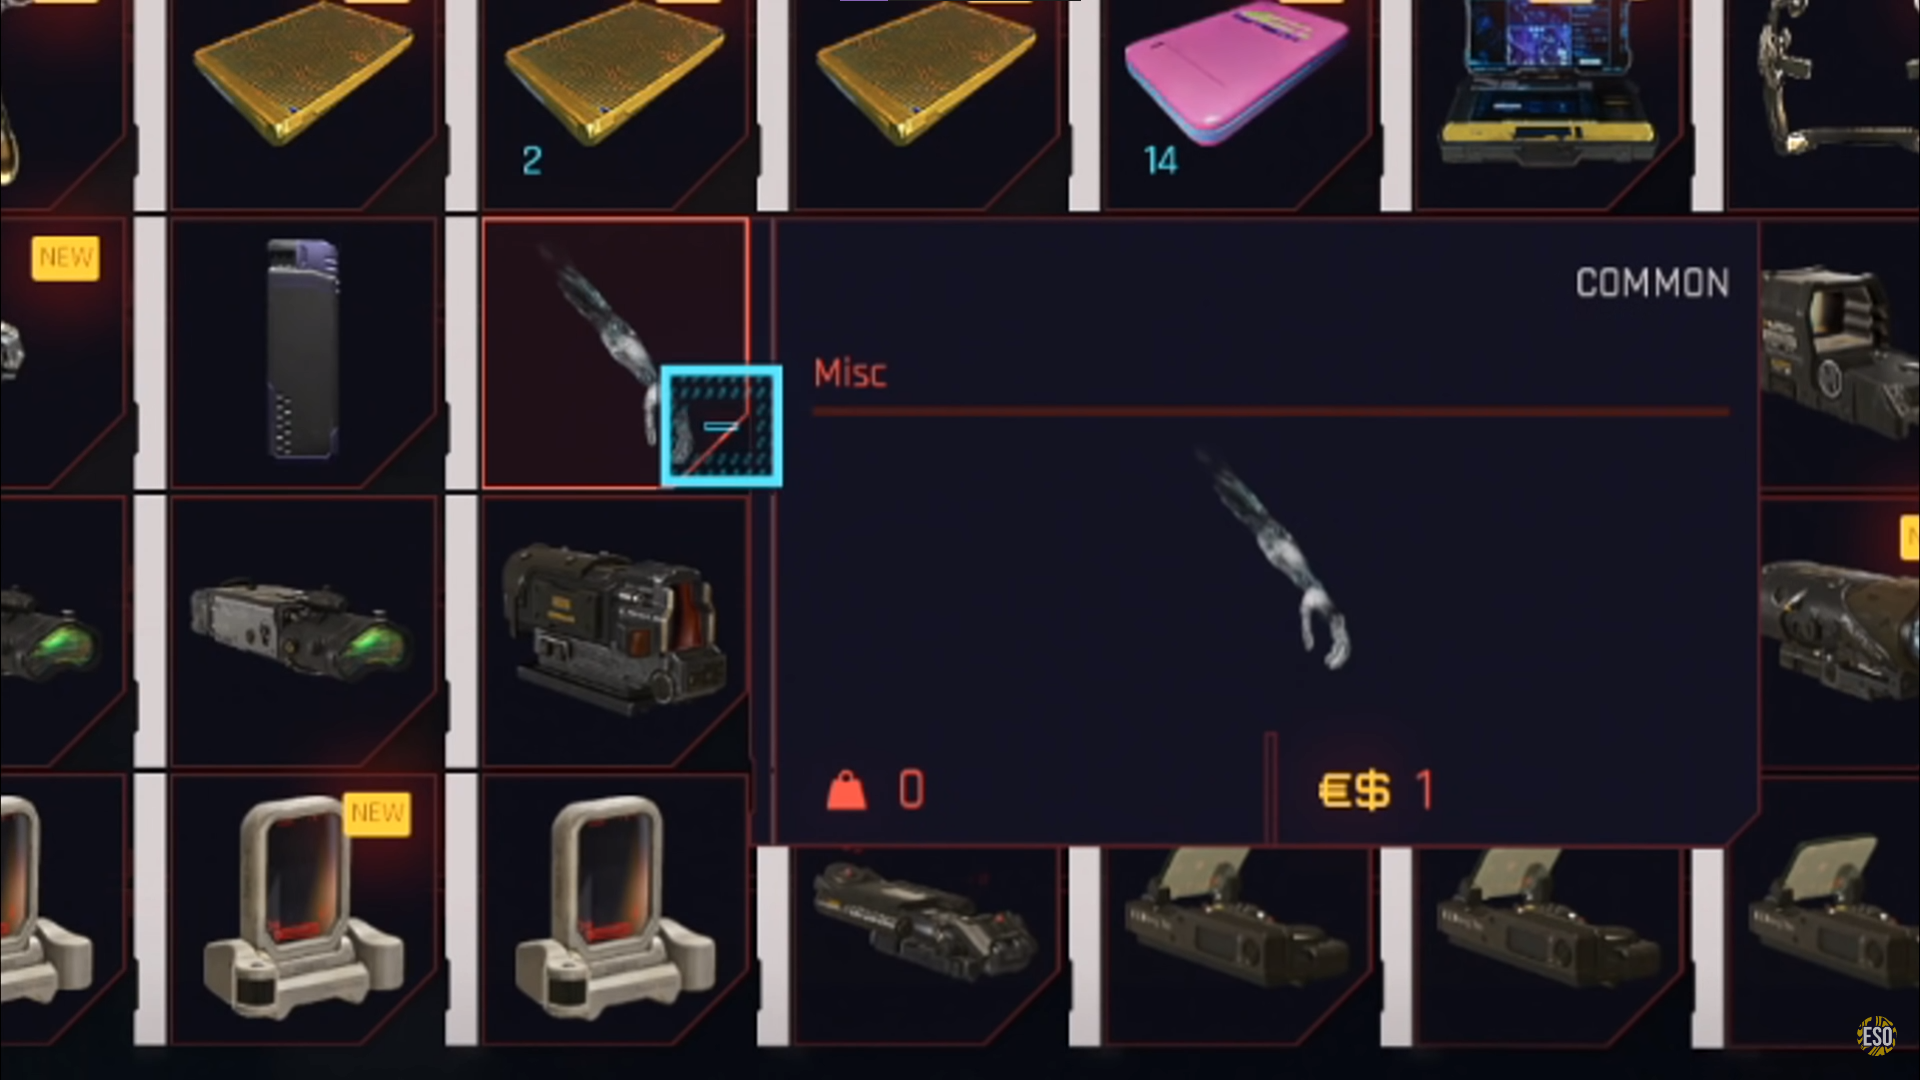 A screenshot of Johnny Silverhand's arm in V's inventory in Cyberpunk 2077. 